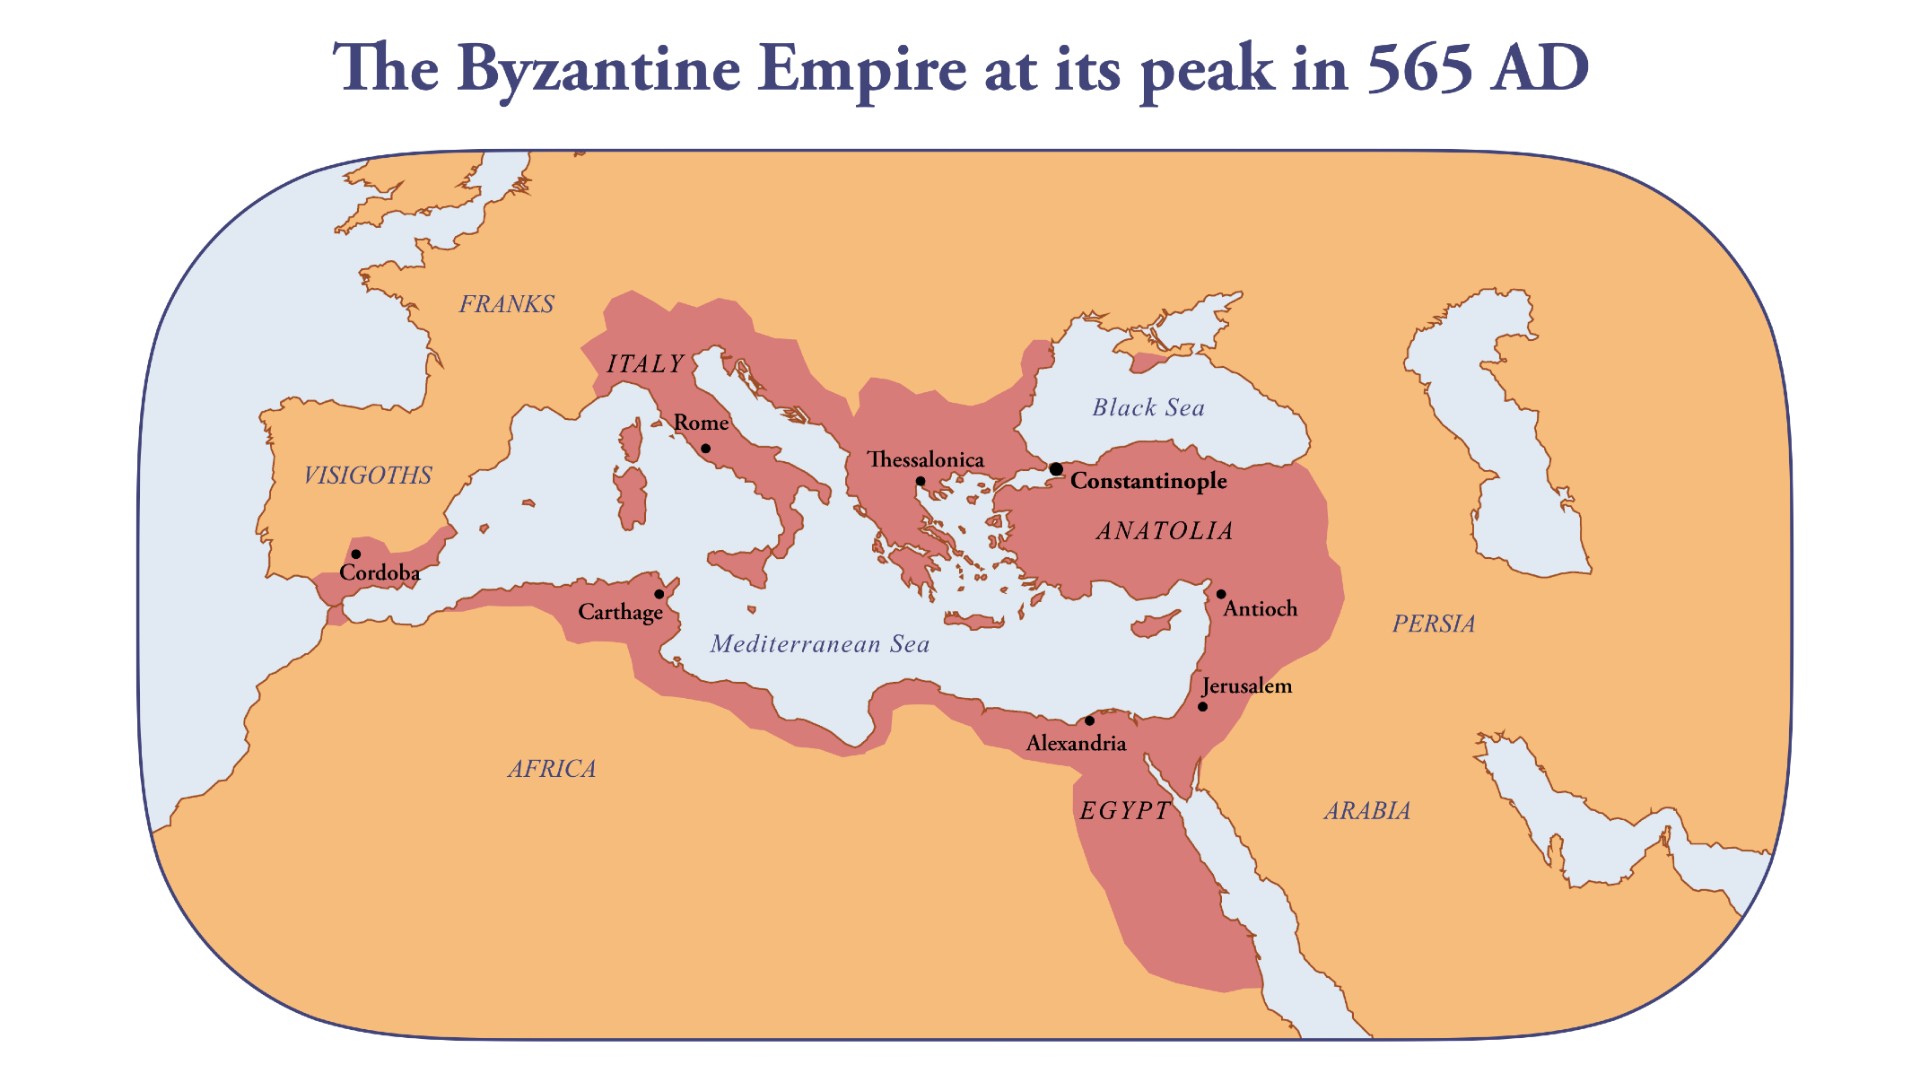 <p>Also known as Byzantium, the Eastern continuation of the Roman Empire after its division in 395, standing with Constantinople as its capital. It reigned as the most sophisticated and powerful Christian empire and civilization, entering a terminal decline in 1200, until Constantinople was overrun by the Ottoman Empire.</p>